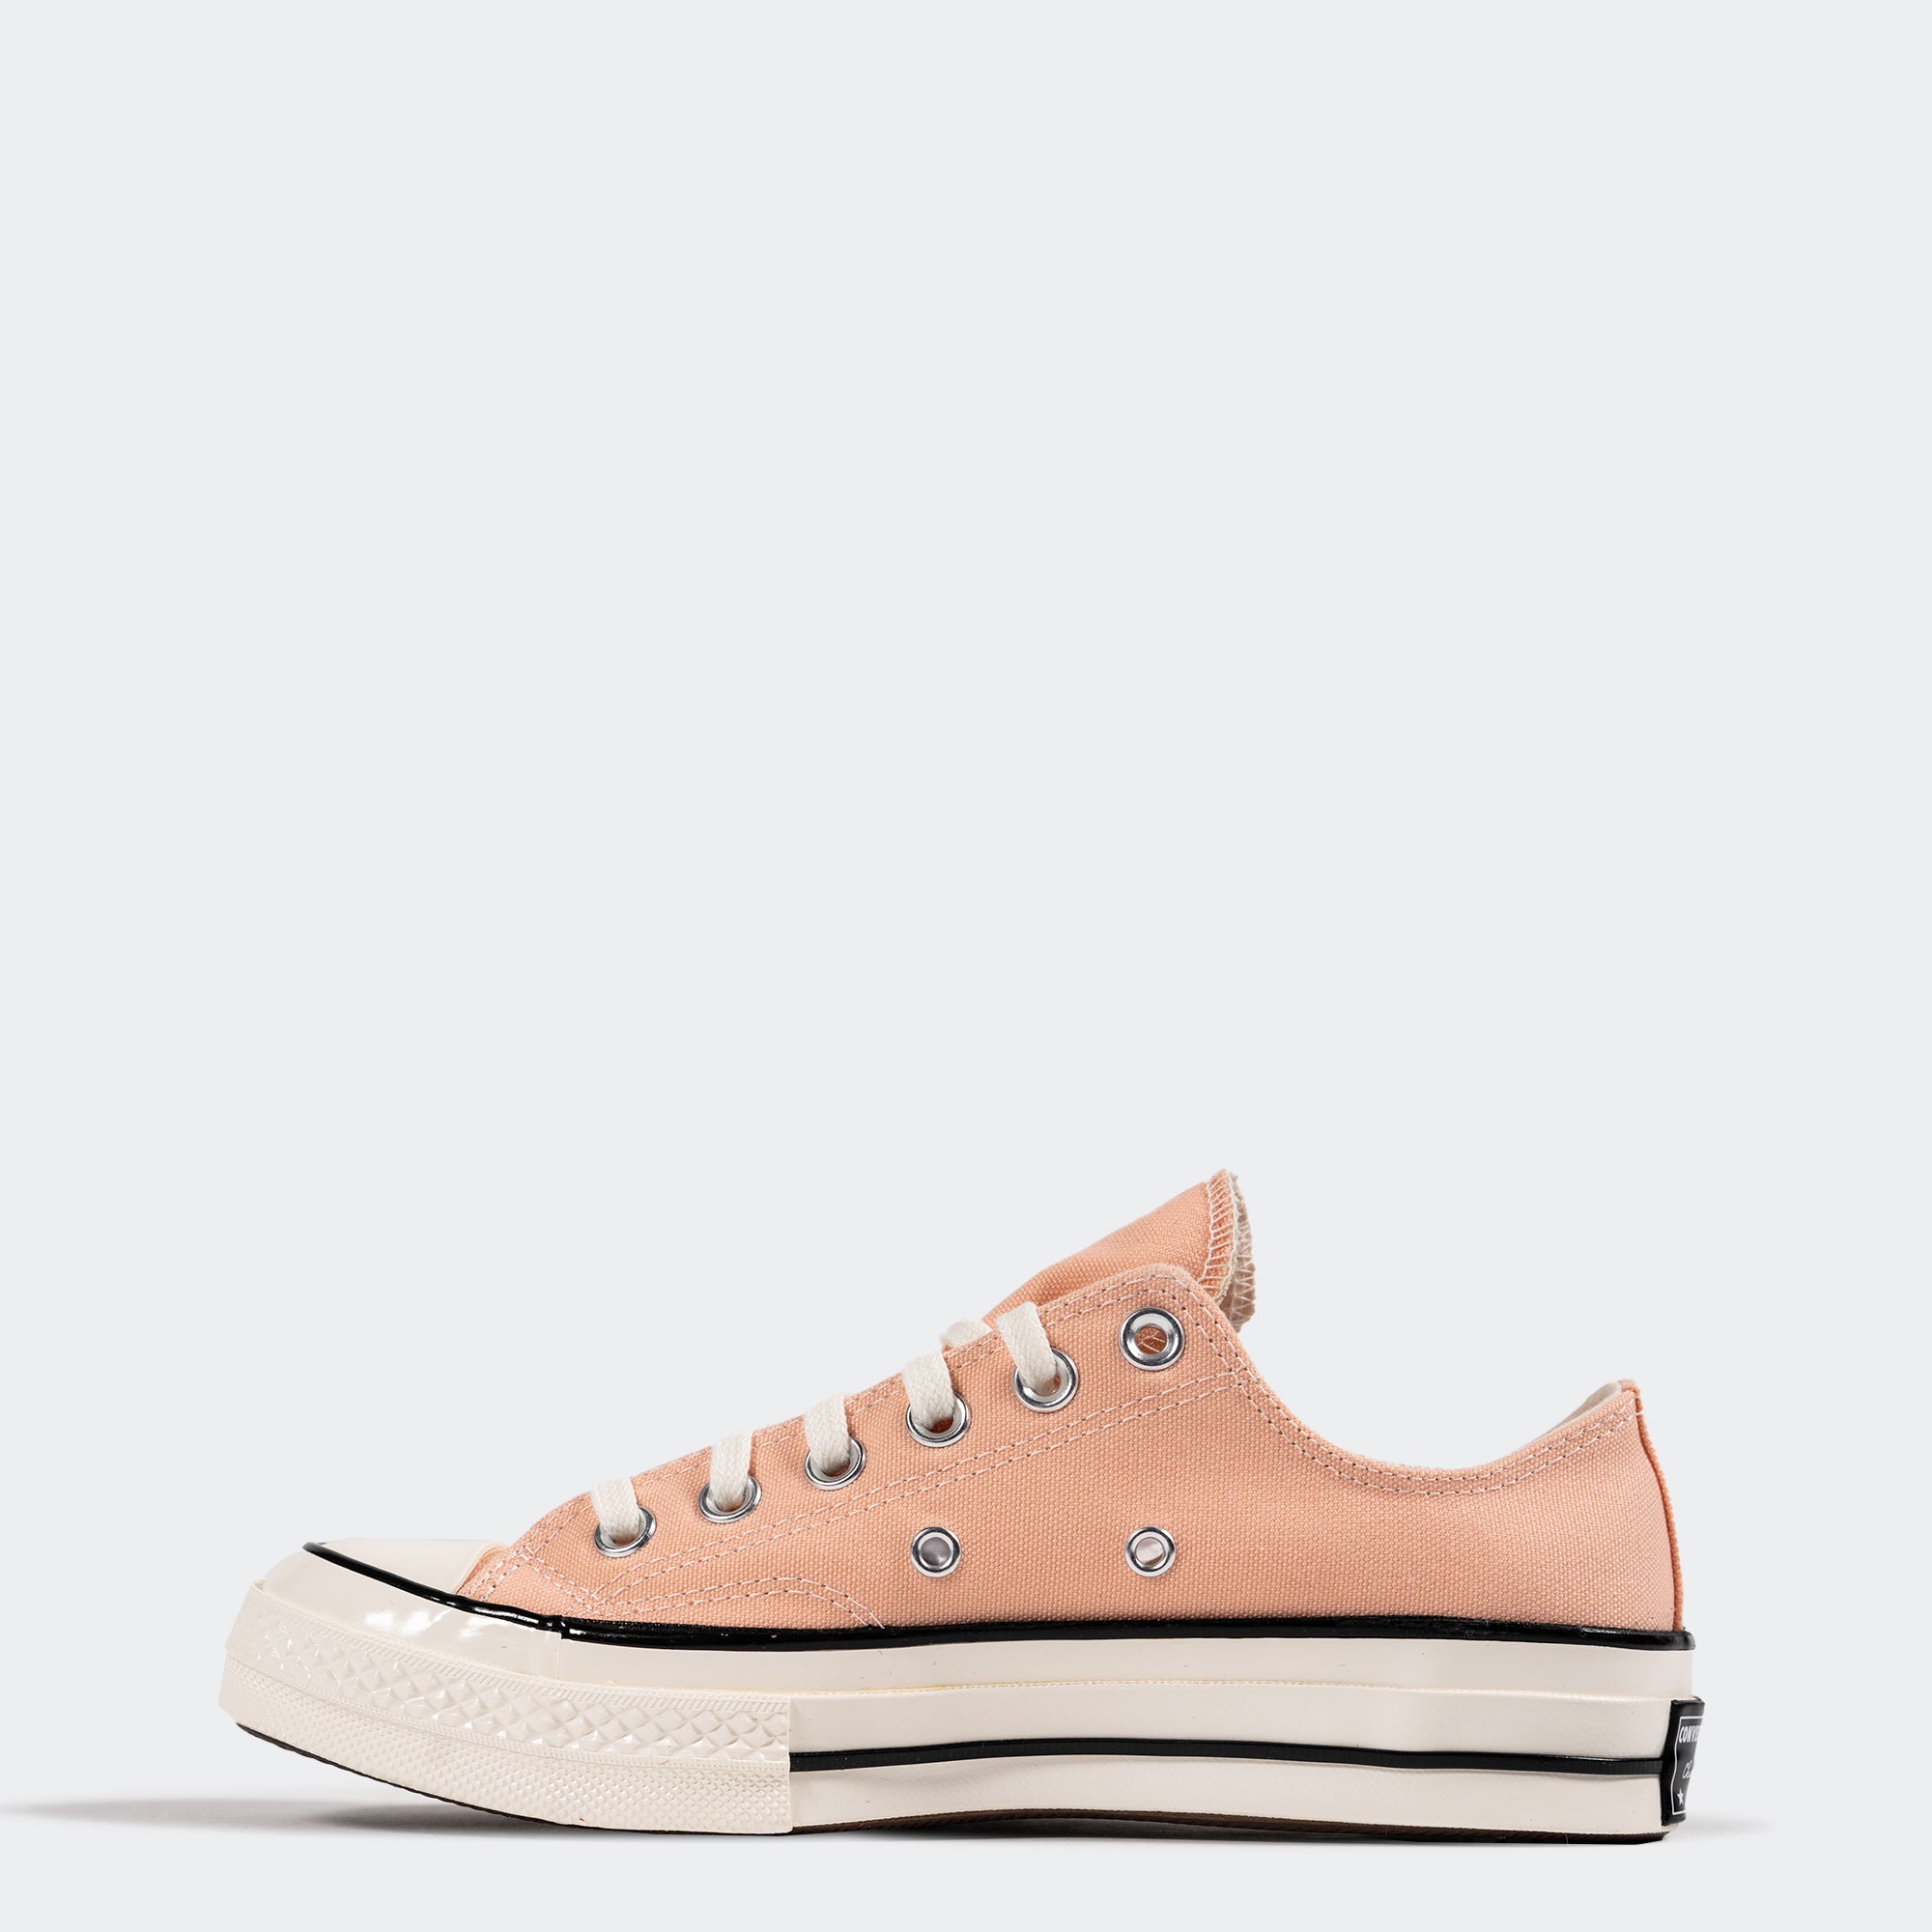 Discover 169+ converse canvas sneakers super hot